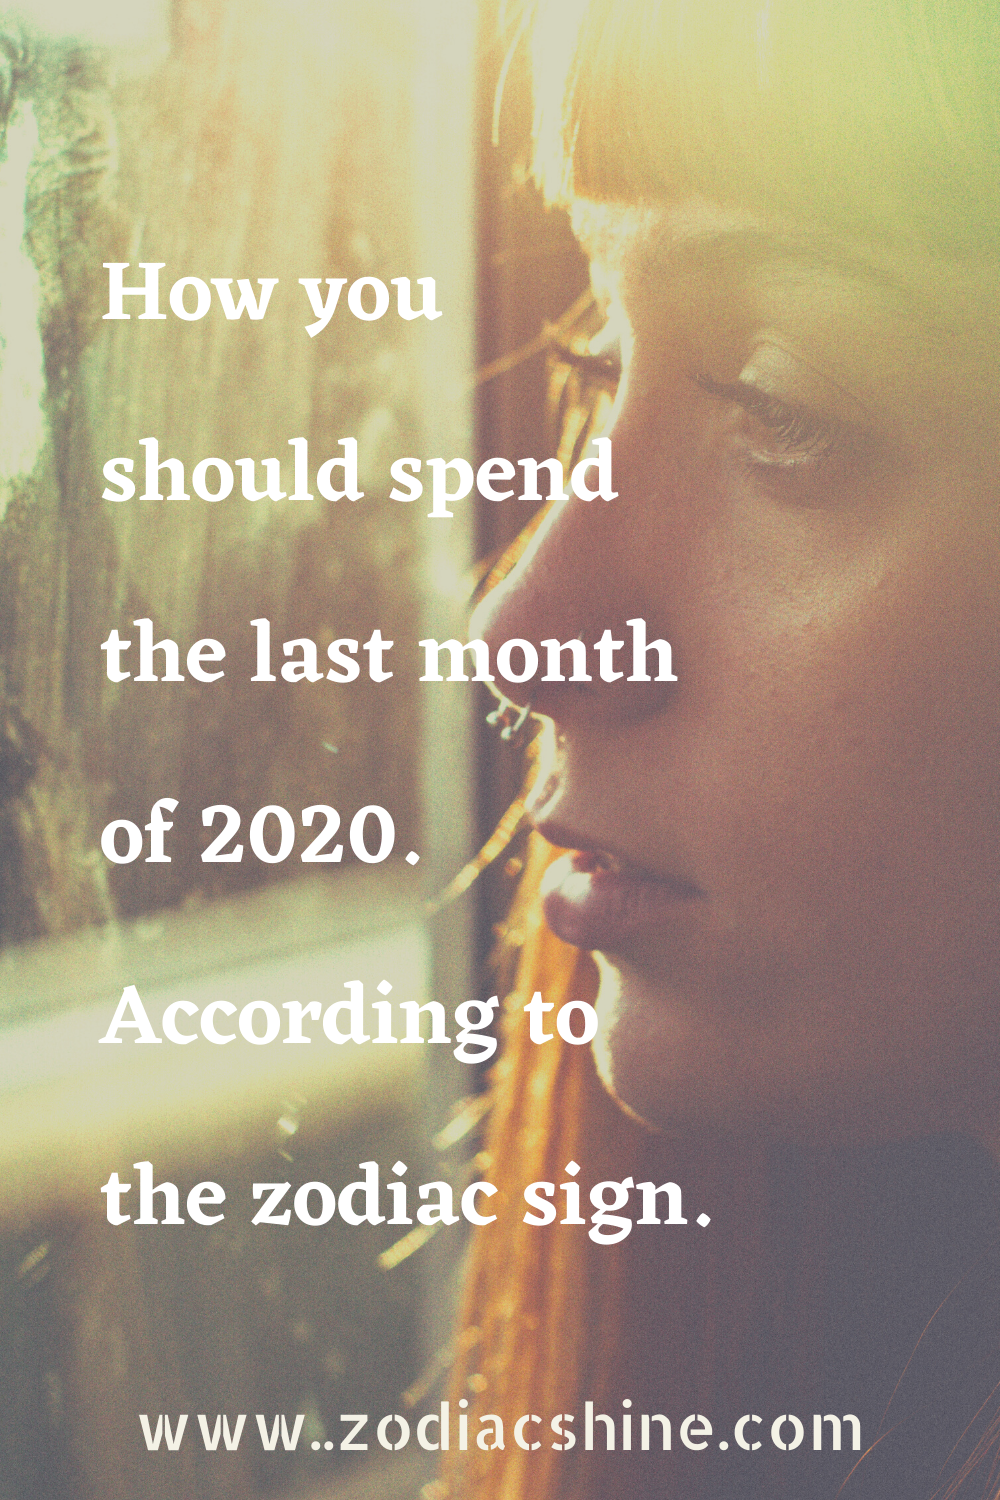 How you should spend the last month of 2020. According to the zodiac sign.